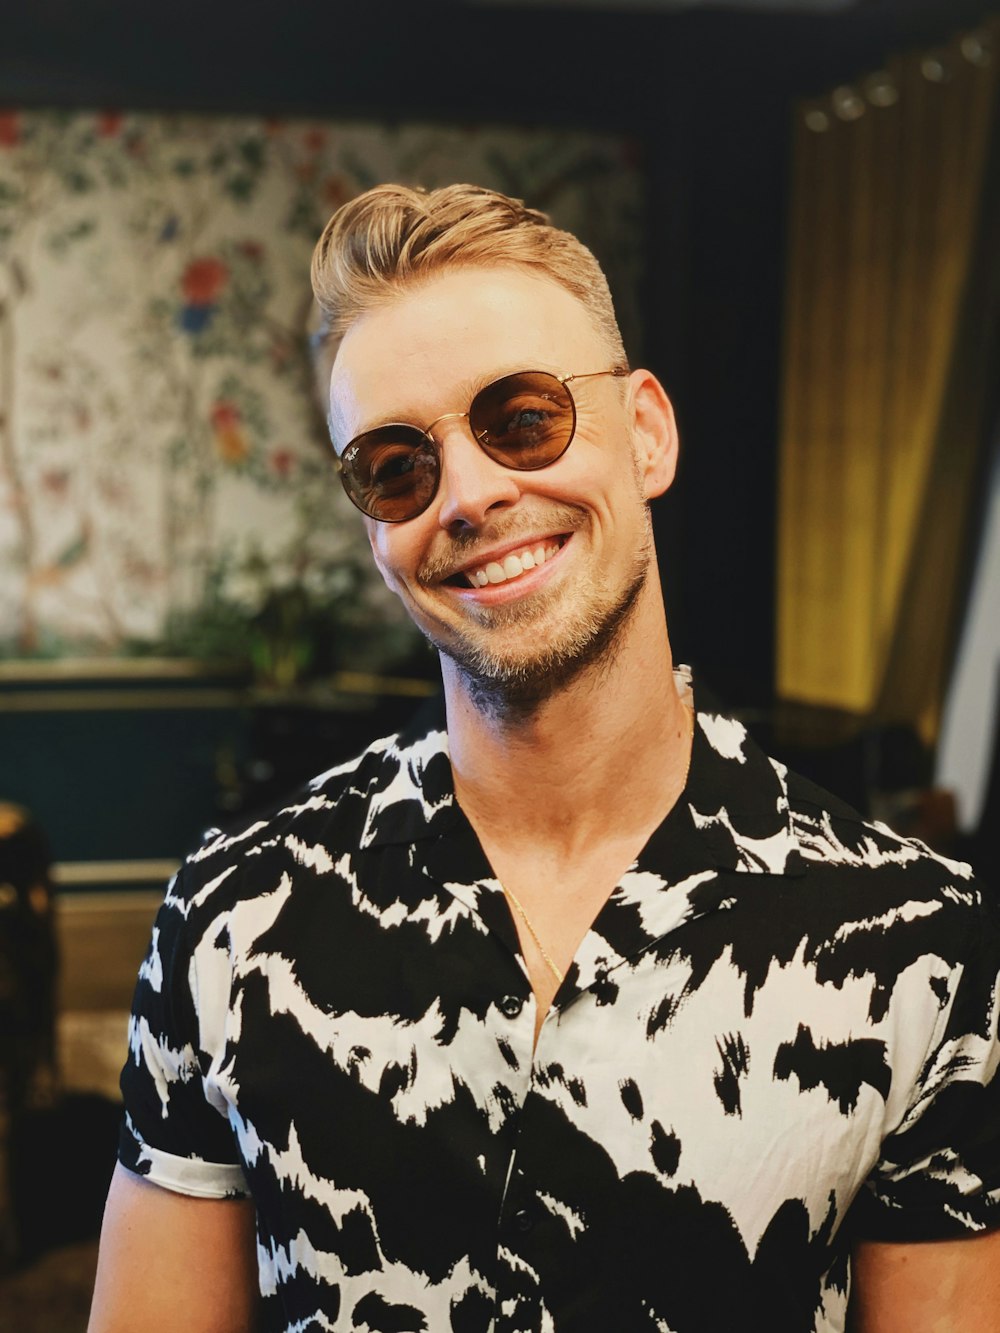 man in black and white floral button up shirt wearing brown sunglasses